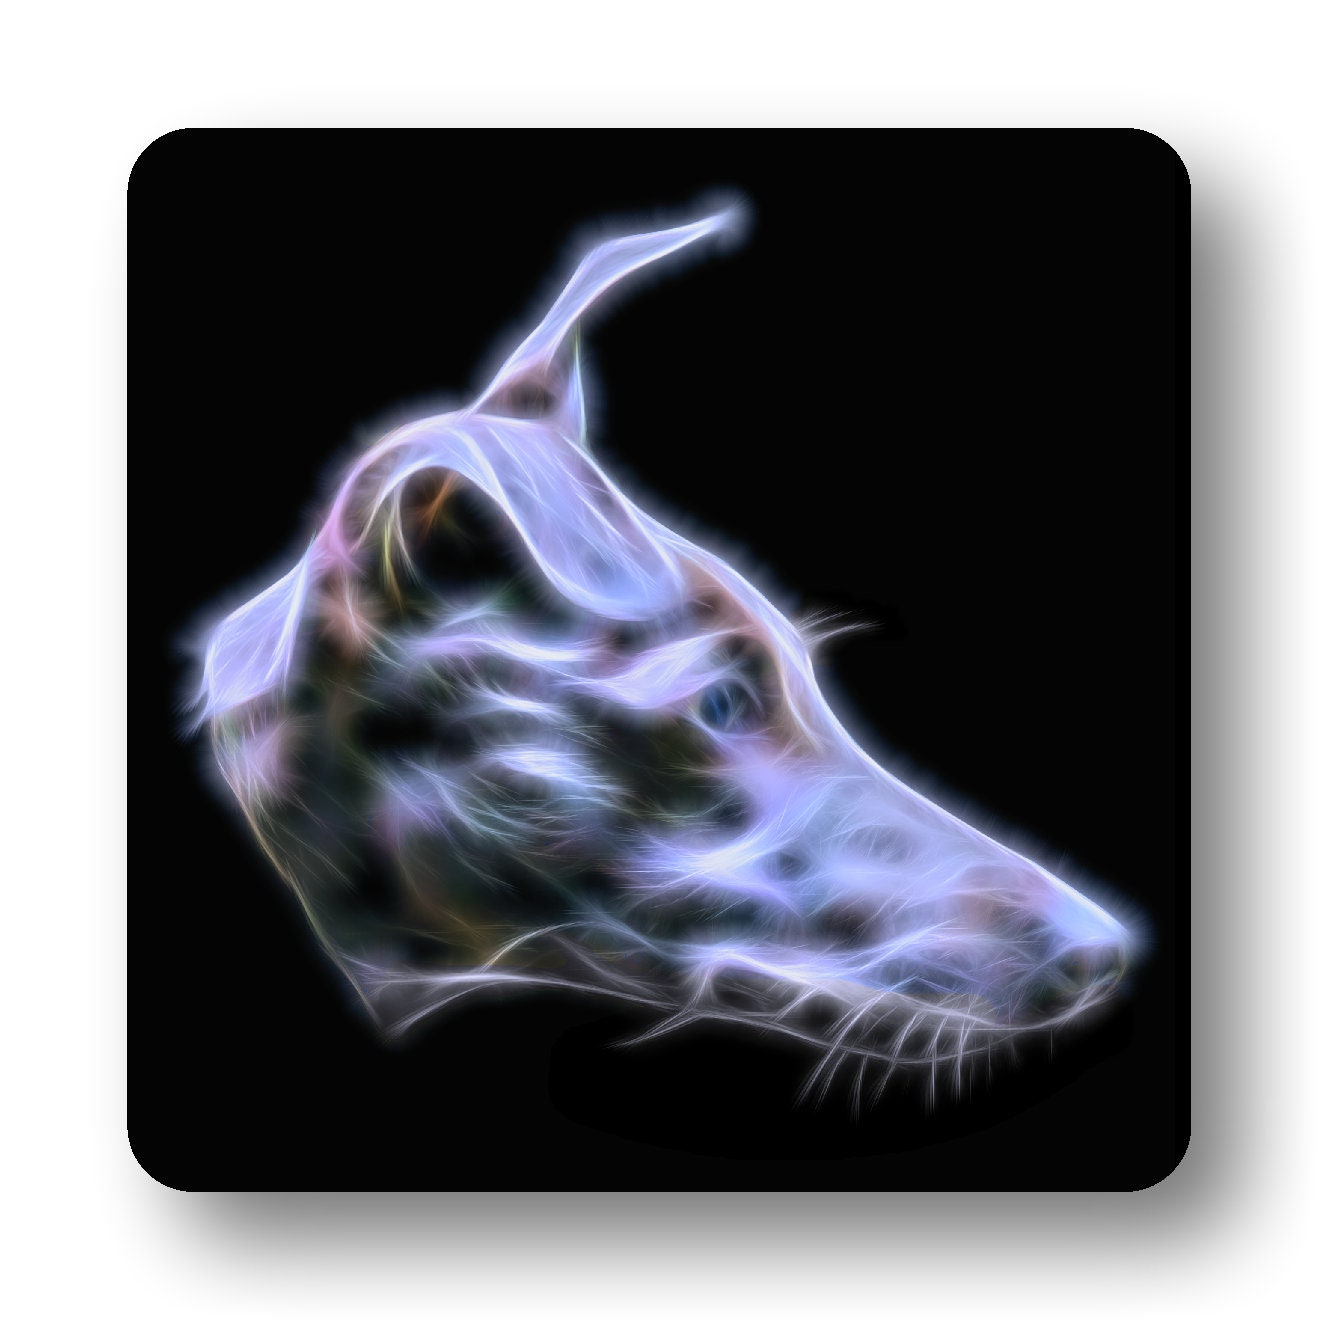 Blue Whippet Metal Wall Plaque with Stunning Fractal Art Design. Also available as Mouse Pad, Keychain, or Coaster.